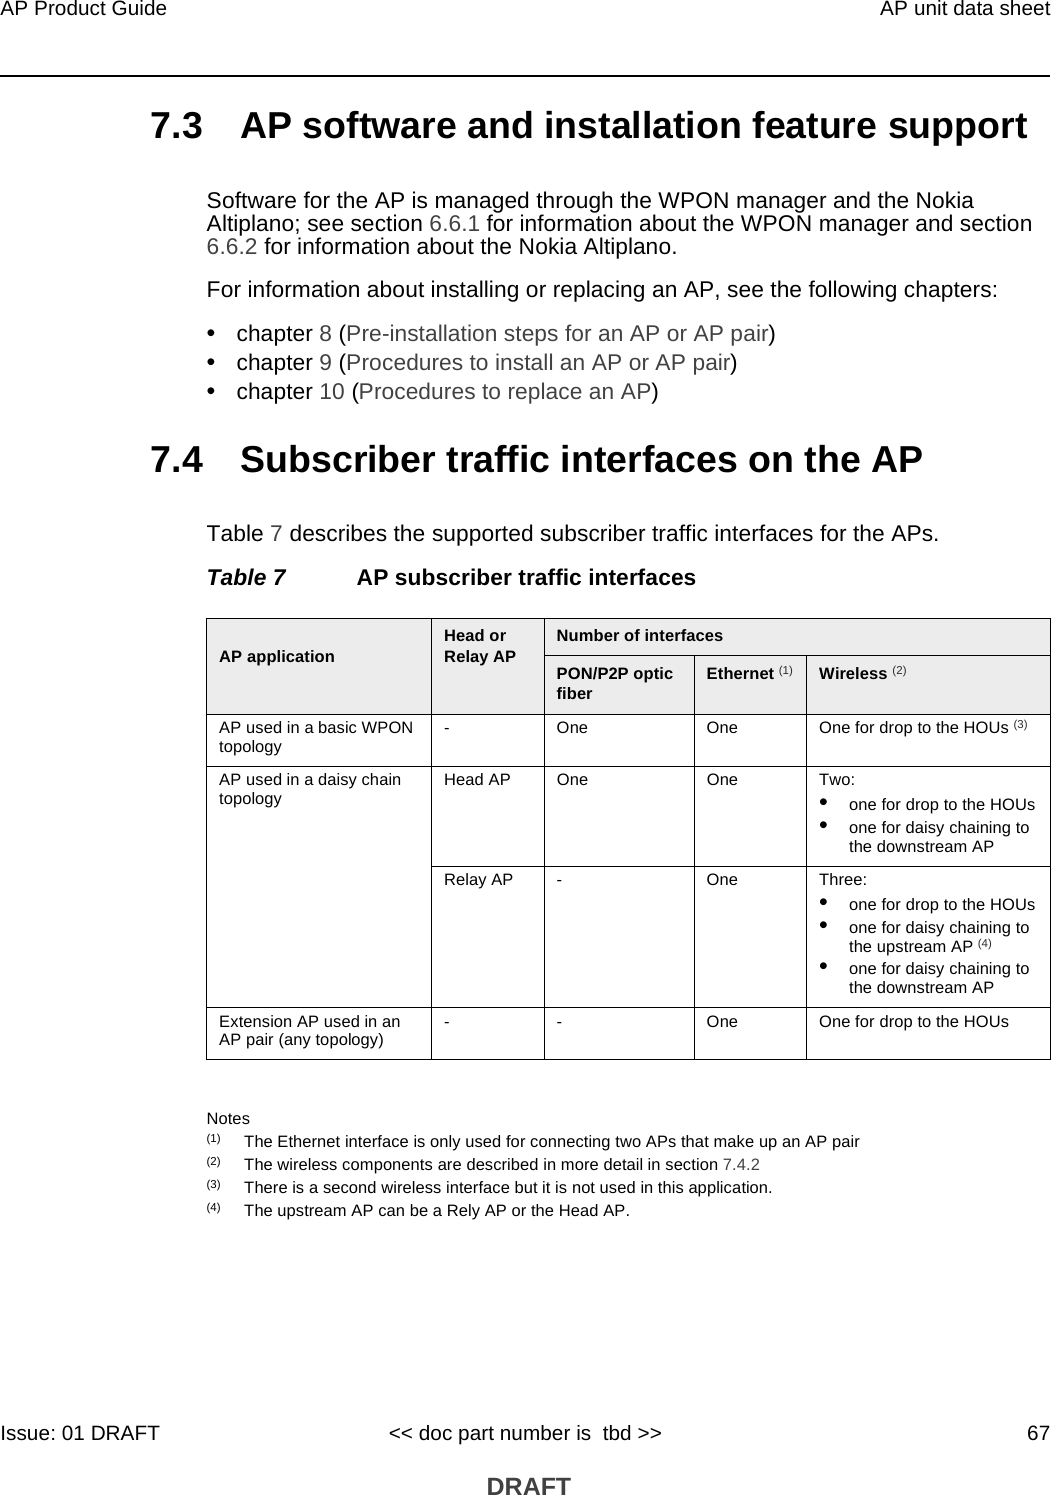 AP Product Guide AP unit data sheetIssue: 01 DRAFT &lt;&lt; doc part number is  tbd &gt;&gt; 67 DRAFT7.3 AP software and installation feature supportSoftware for the AP is managed through the WPON manager and the Nokia Altiplano; see section 6.6.1 for information about the WPON manager and section 6.6.2 for information about the Nokia Altiplano.For information about installing or replacing an AP, see the following chapters:•chapter 8 (Pre-installation steps for an AP or AP pair)•chapter 9 (Procedures to install an AP or AP pair)•chapter 10 (Procedures to replace an AP)7.4 Subscriber traffic interfaces on the APTable 7 describes the supported subscriber traffic interfaces for the APs. Table 7 AP subscriber traffic interfacesNotes(1) The Ethernet interface is only used for connecting two APs that make up an AP pair(2) The wireless components are described in more detail in section 7.4.2(3) There is a second wireless interface but it is not used in this application.(4) The upstream AP can be a Rely AP or the Head AP.AP application Head or Relay AP Number of interfacesPON/P2P optic fiber Ethernet (1) Wireless (2)AP used in a basic WPON topology - One  One  One for drop to the HOUs (3)AP used in a daisy chain topology Head AP One One  Two: •one for drop to the HOUs•one for daisy chaining to the downstream APRelay AP - One  Three: •one for drop to the HOUs•one for daisy chaining to the upstream AP (4)•one for daisy chaining to the downstream APExtension AP used in an AP pair (any topology) - - One  One for drop to the HOUs